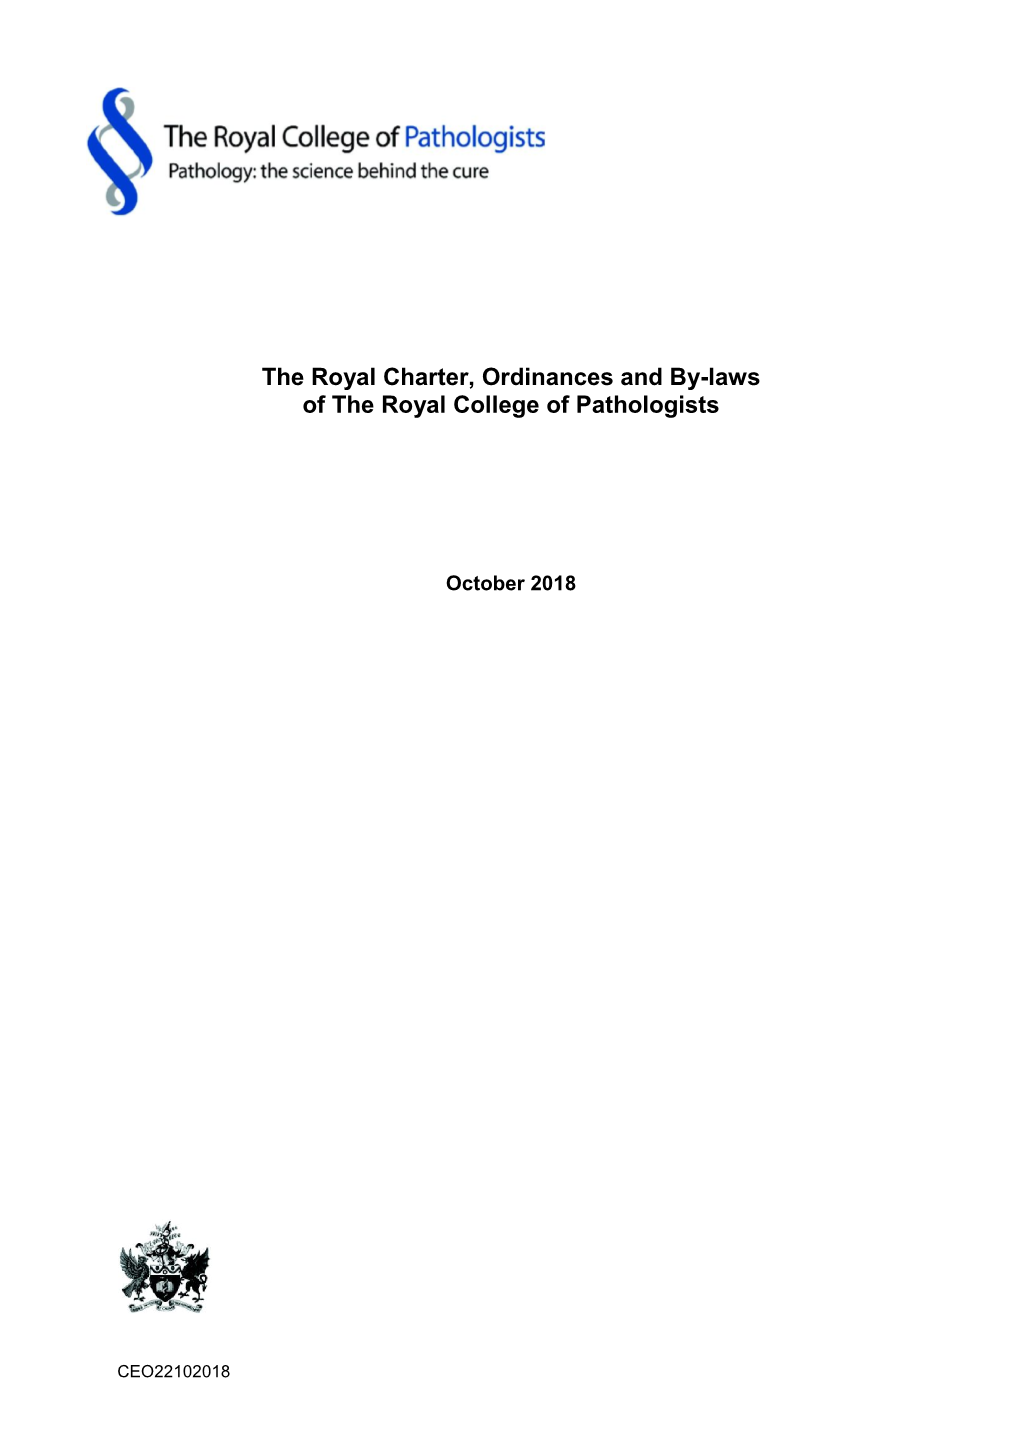 The Royal Charter, Ordinances and By-Laws of the Royal College of Pathologists